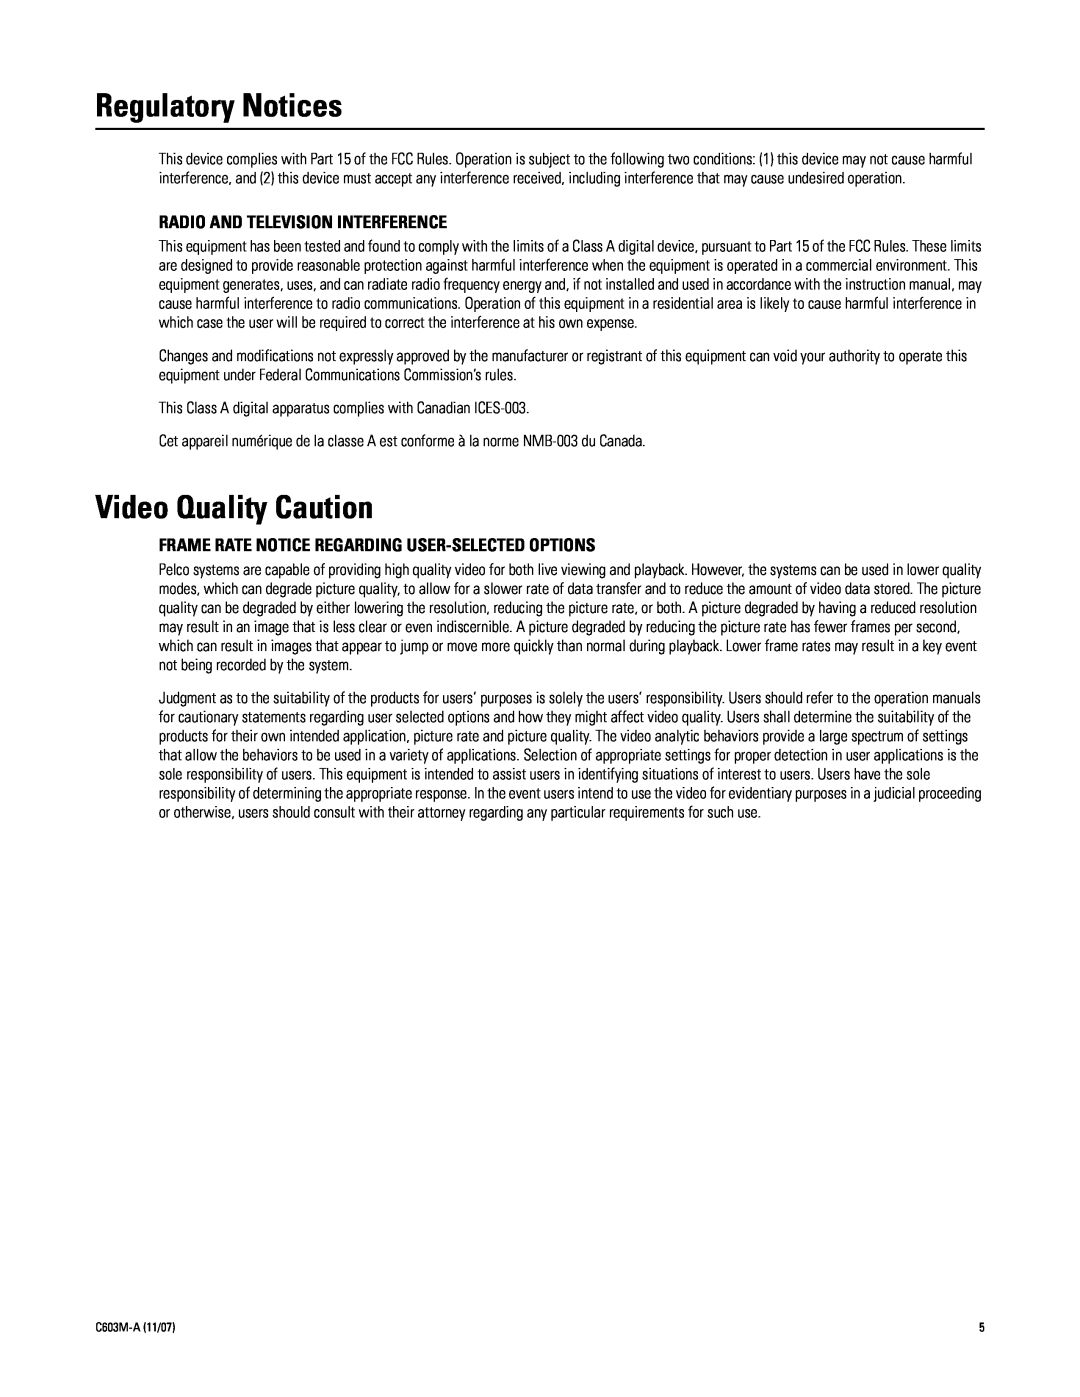 Pelco C603M-A (11/07) manual Regulatory Notices, Video Quality Caution, Radio And Television Interference 